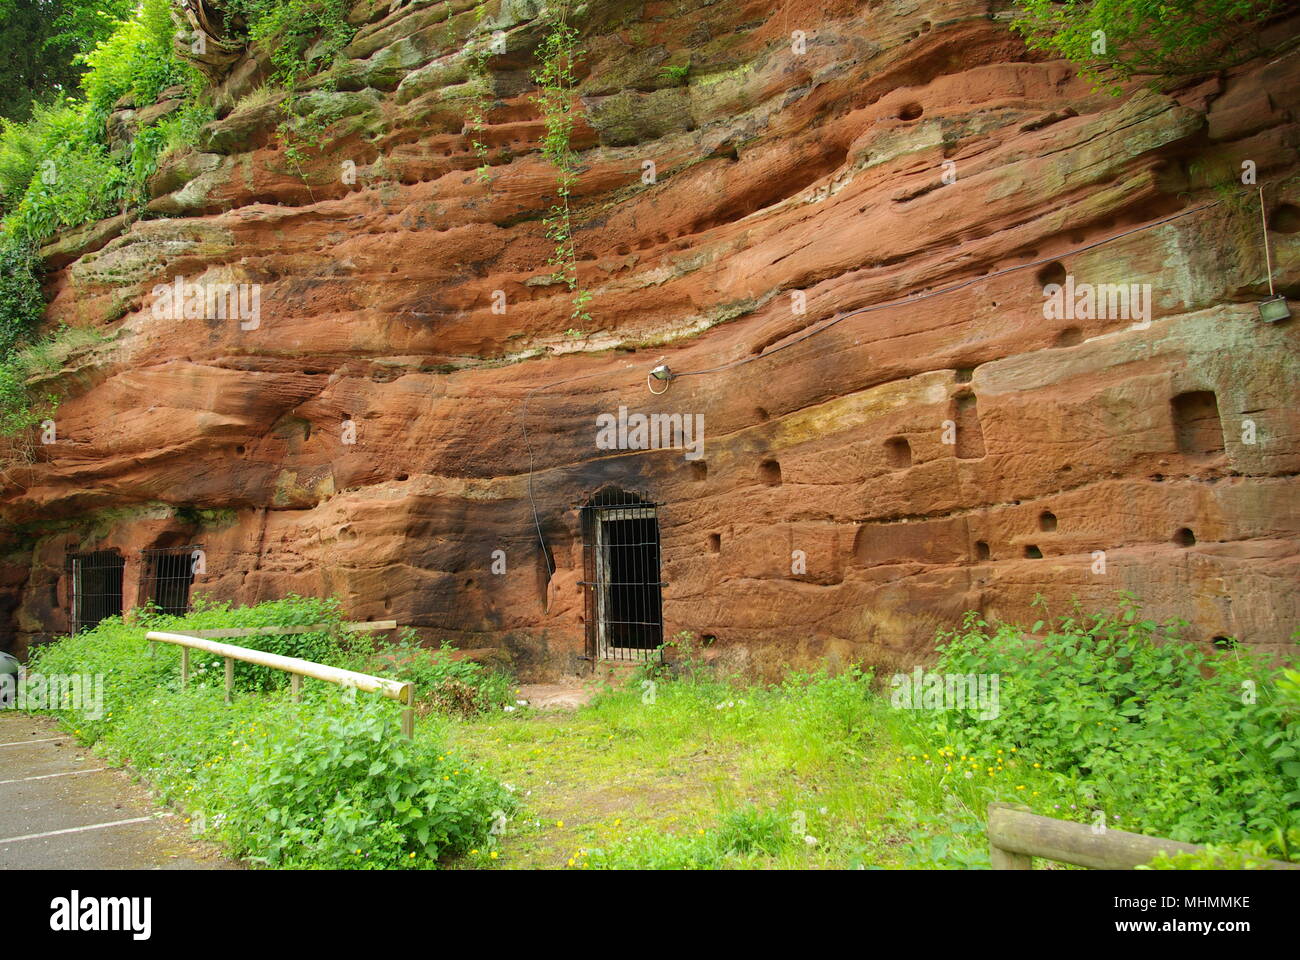 A house in the rock at Wolverley in Worcestershire, hewn out of the sandstone hillside near the River Severn.  Several of these cave houses were built in the area in the late 18th century.  In 2000 one of the rock houses was put on the property market for ú10,000.  It was carpeted, but had no electricity, running water or toilet facilities. Stock Photo